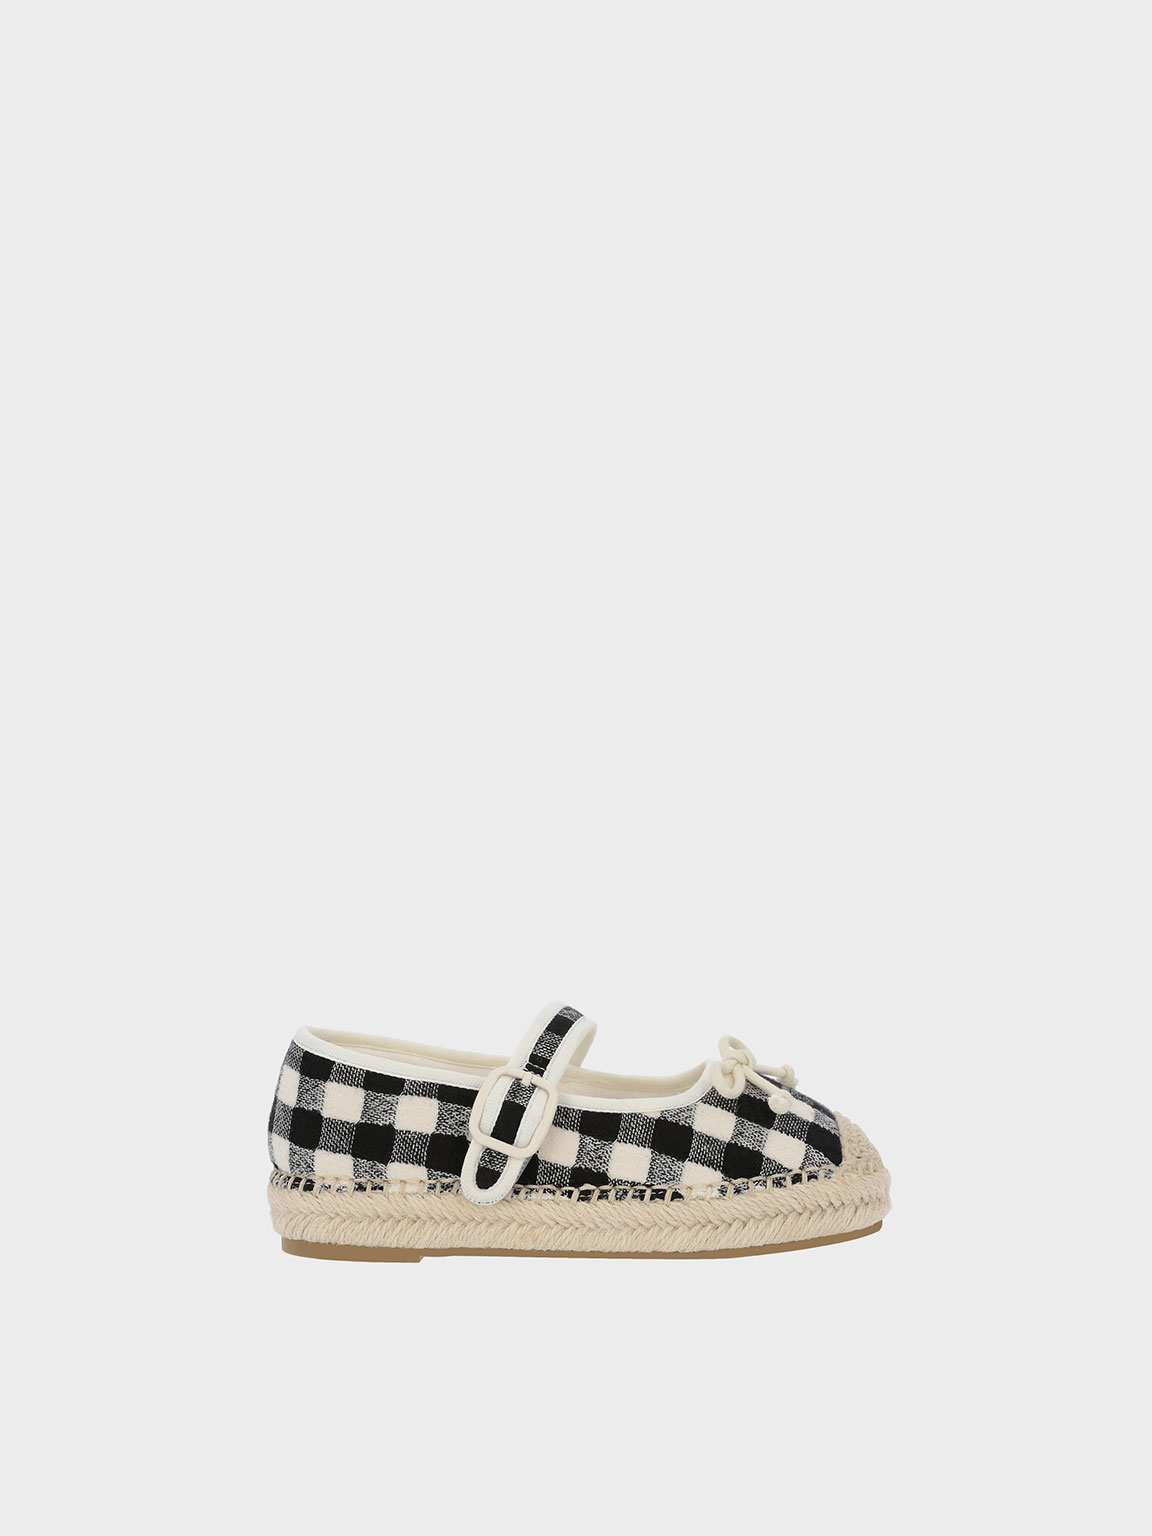 Charles & Keith - Girls' Gingham Bow Espadrilles In Black